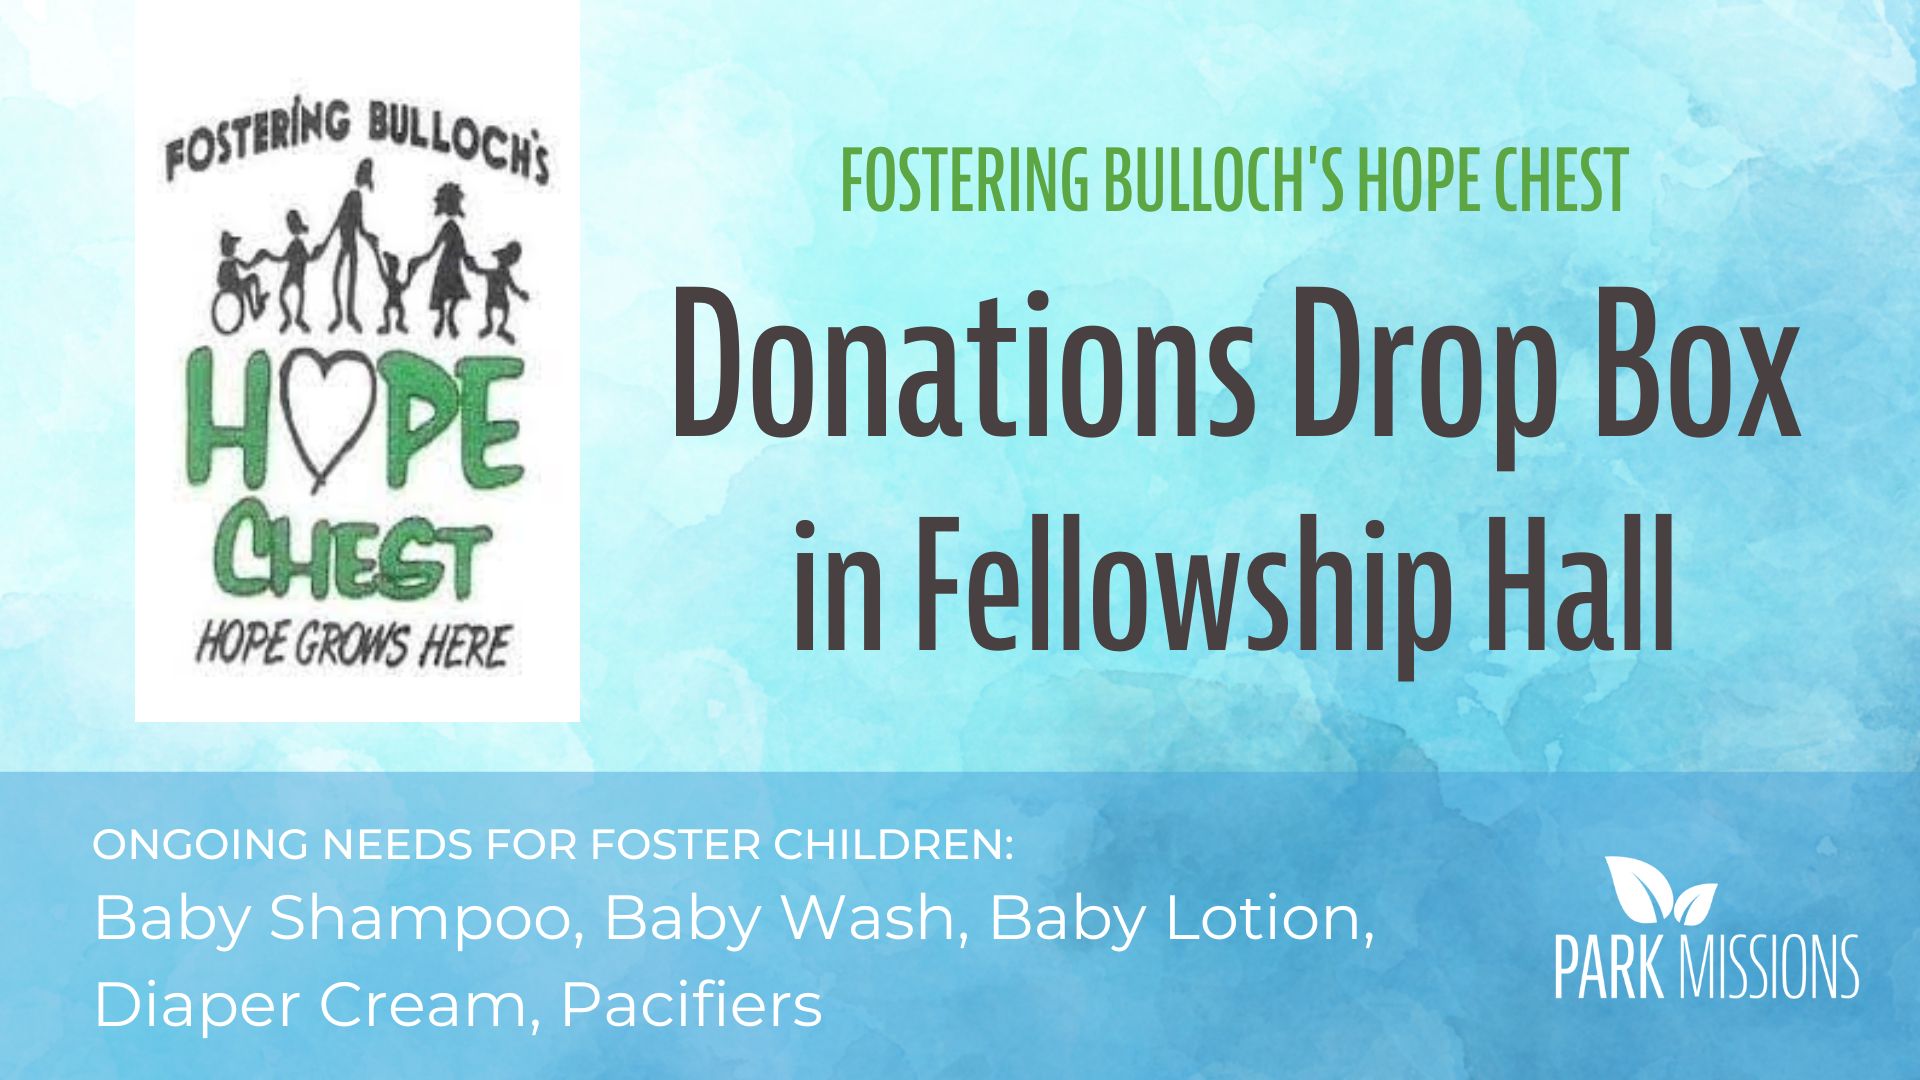 Fostering Bulloch and Park Missions logos